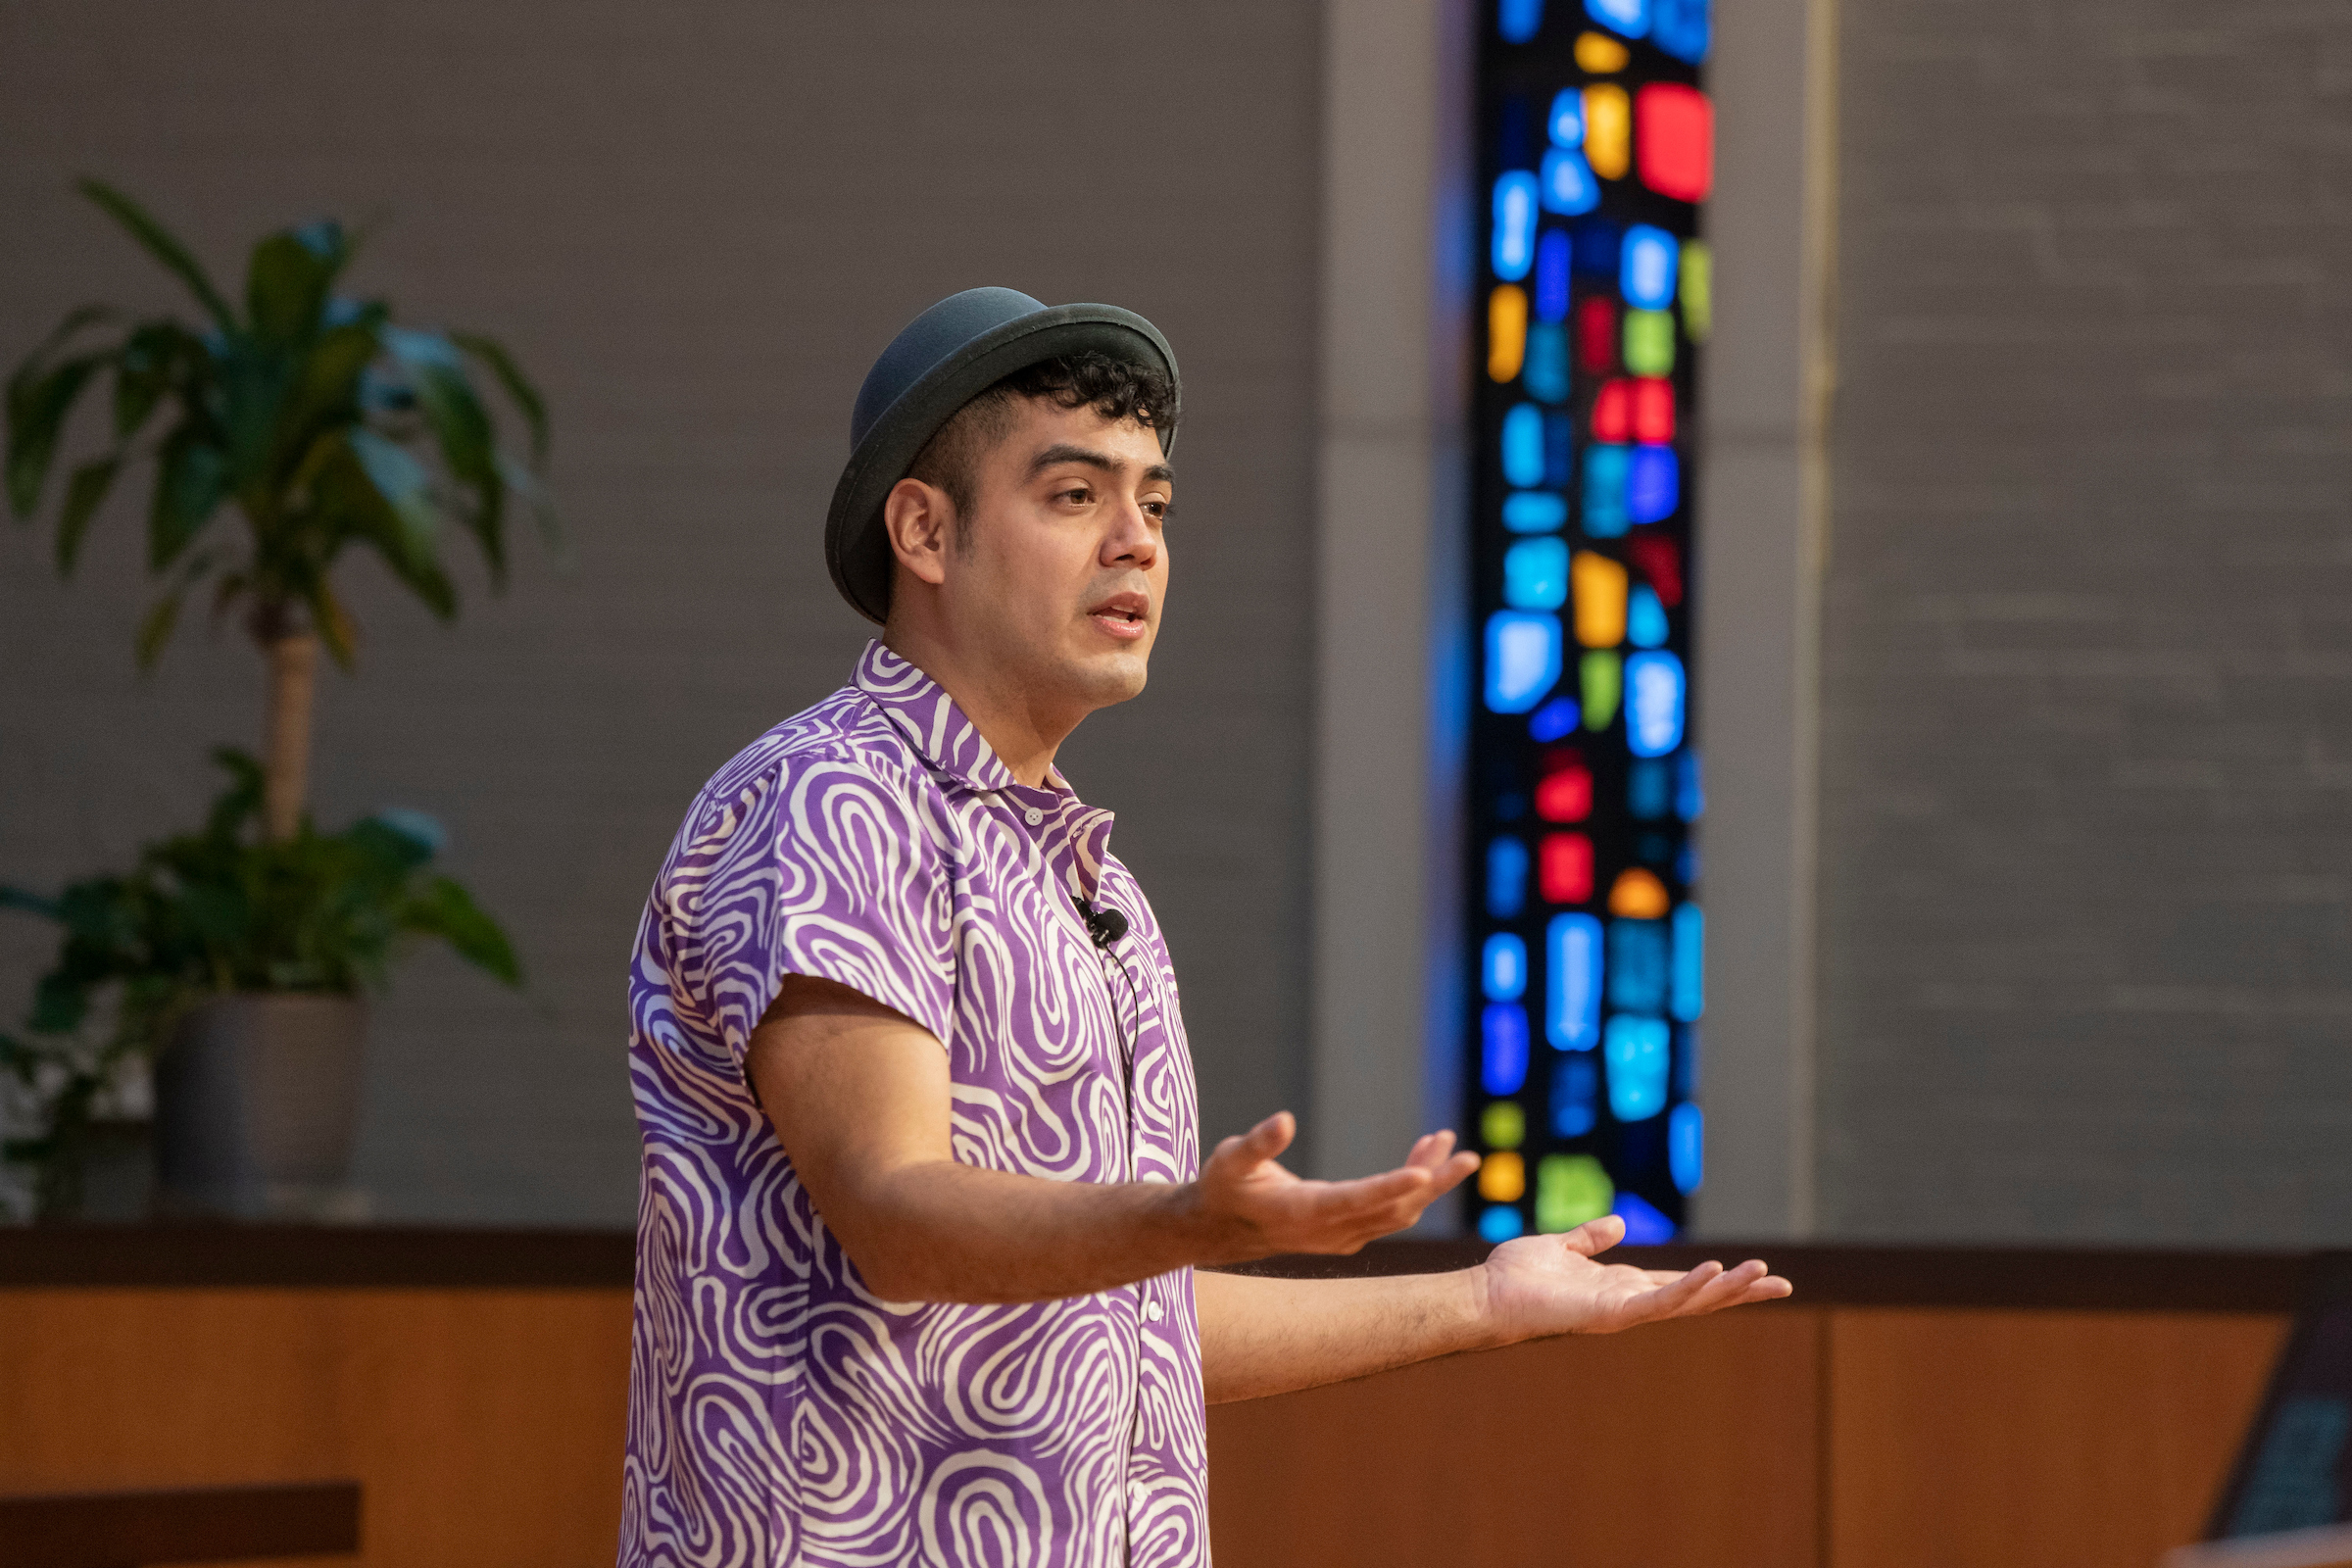 Saul Flores speaks at LVC's annual Symposium on Inclusive Excellence